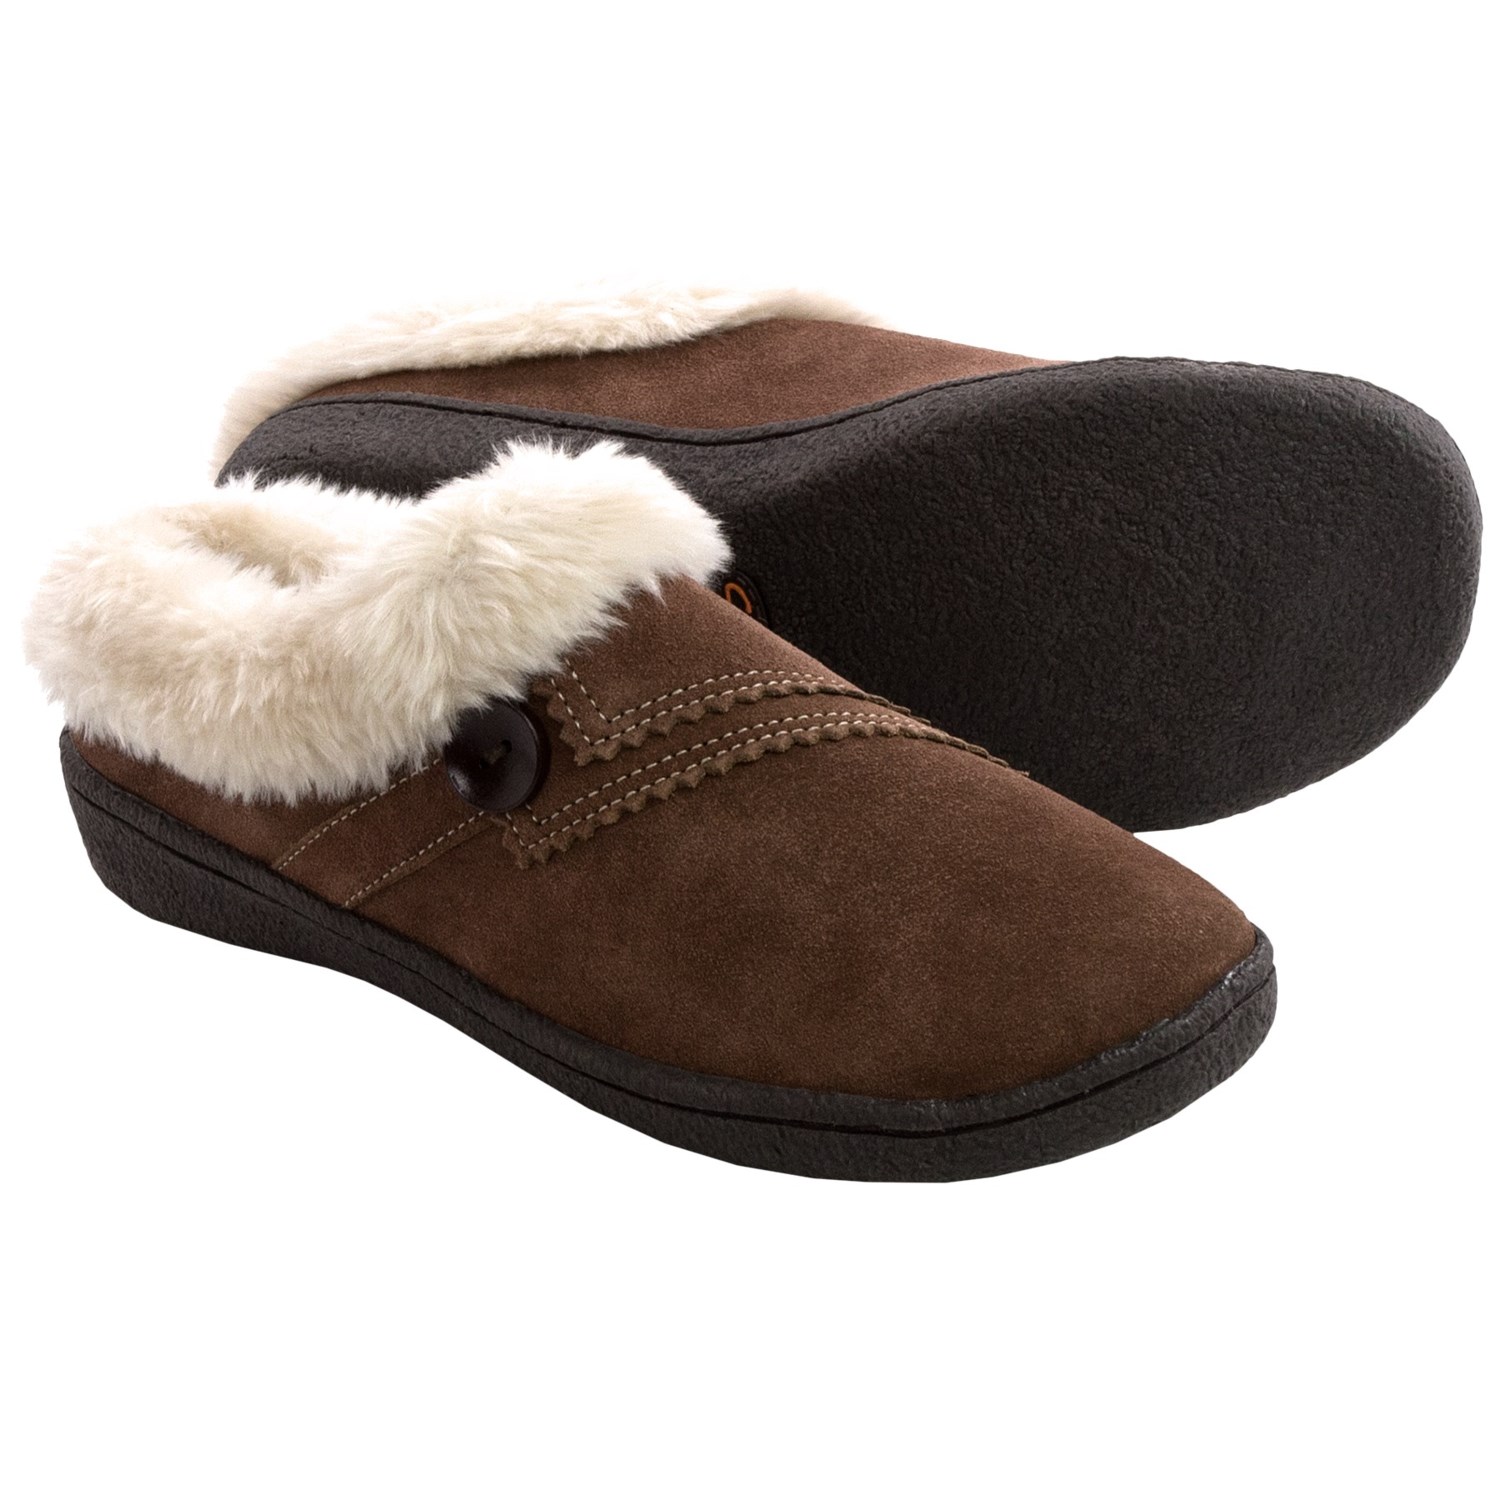 Clarks Button Clog Slippers (For Women) - Save 45%